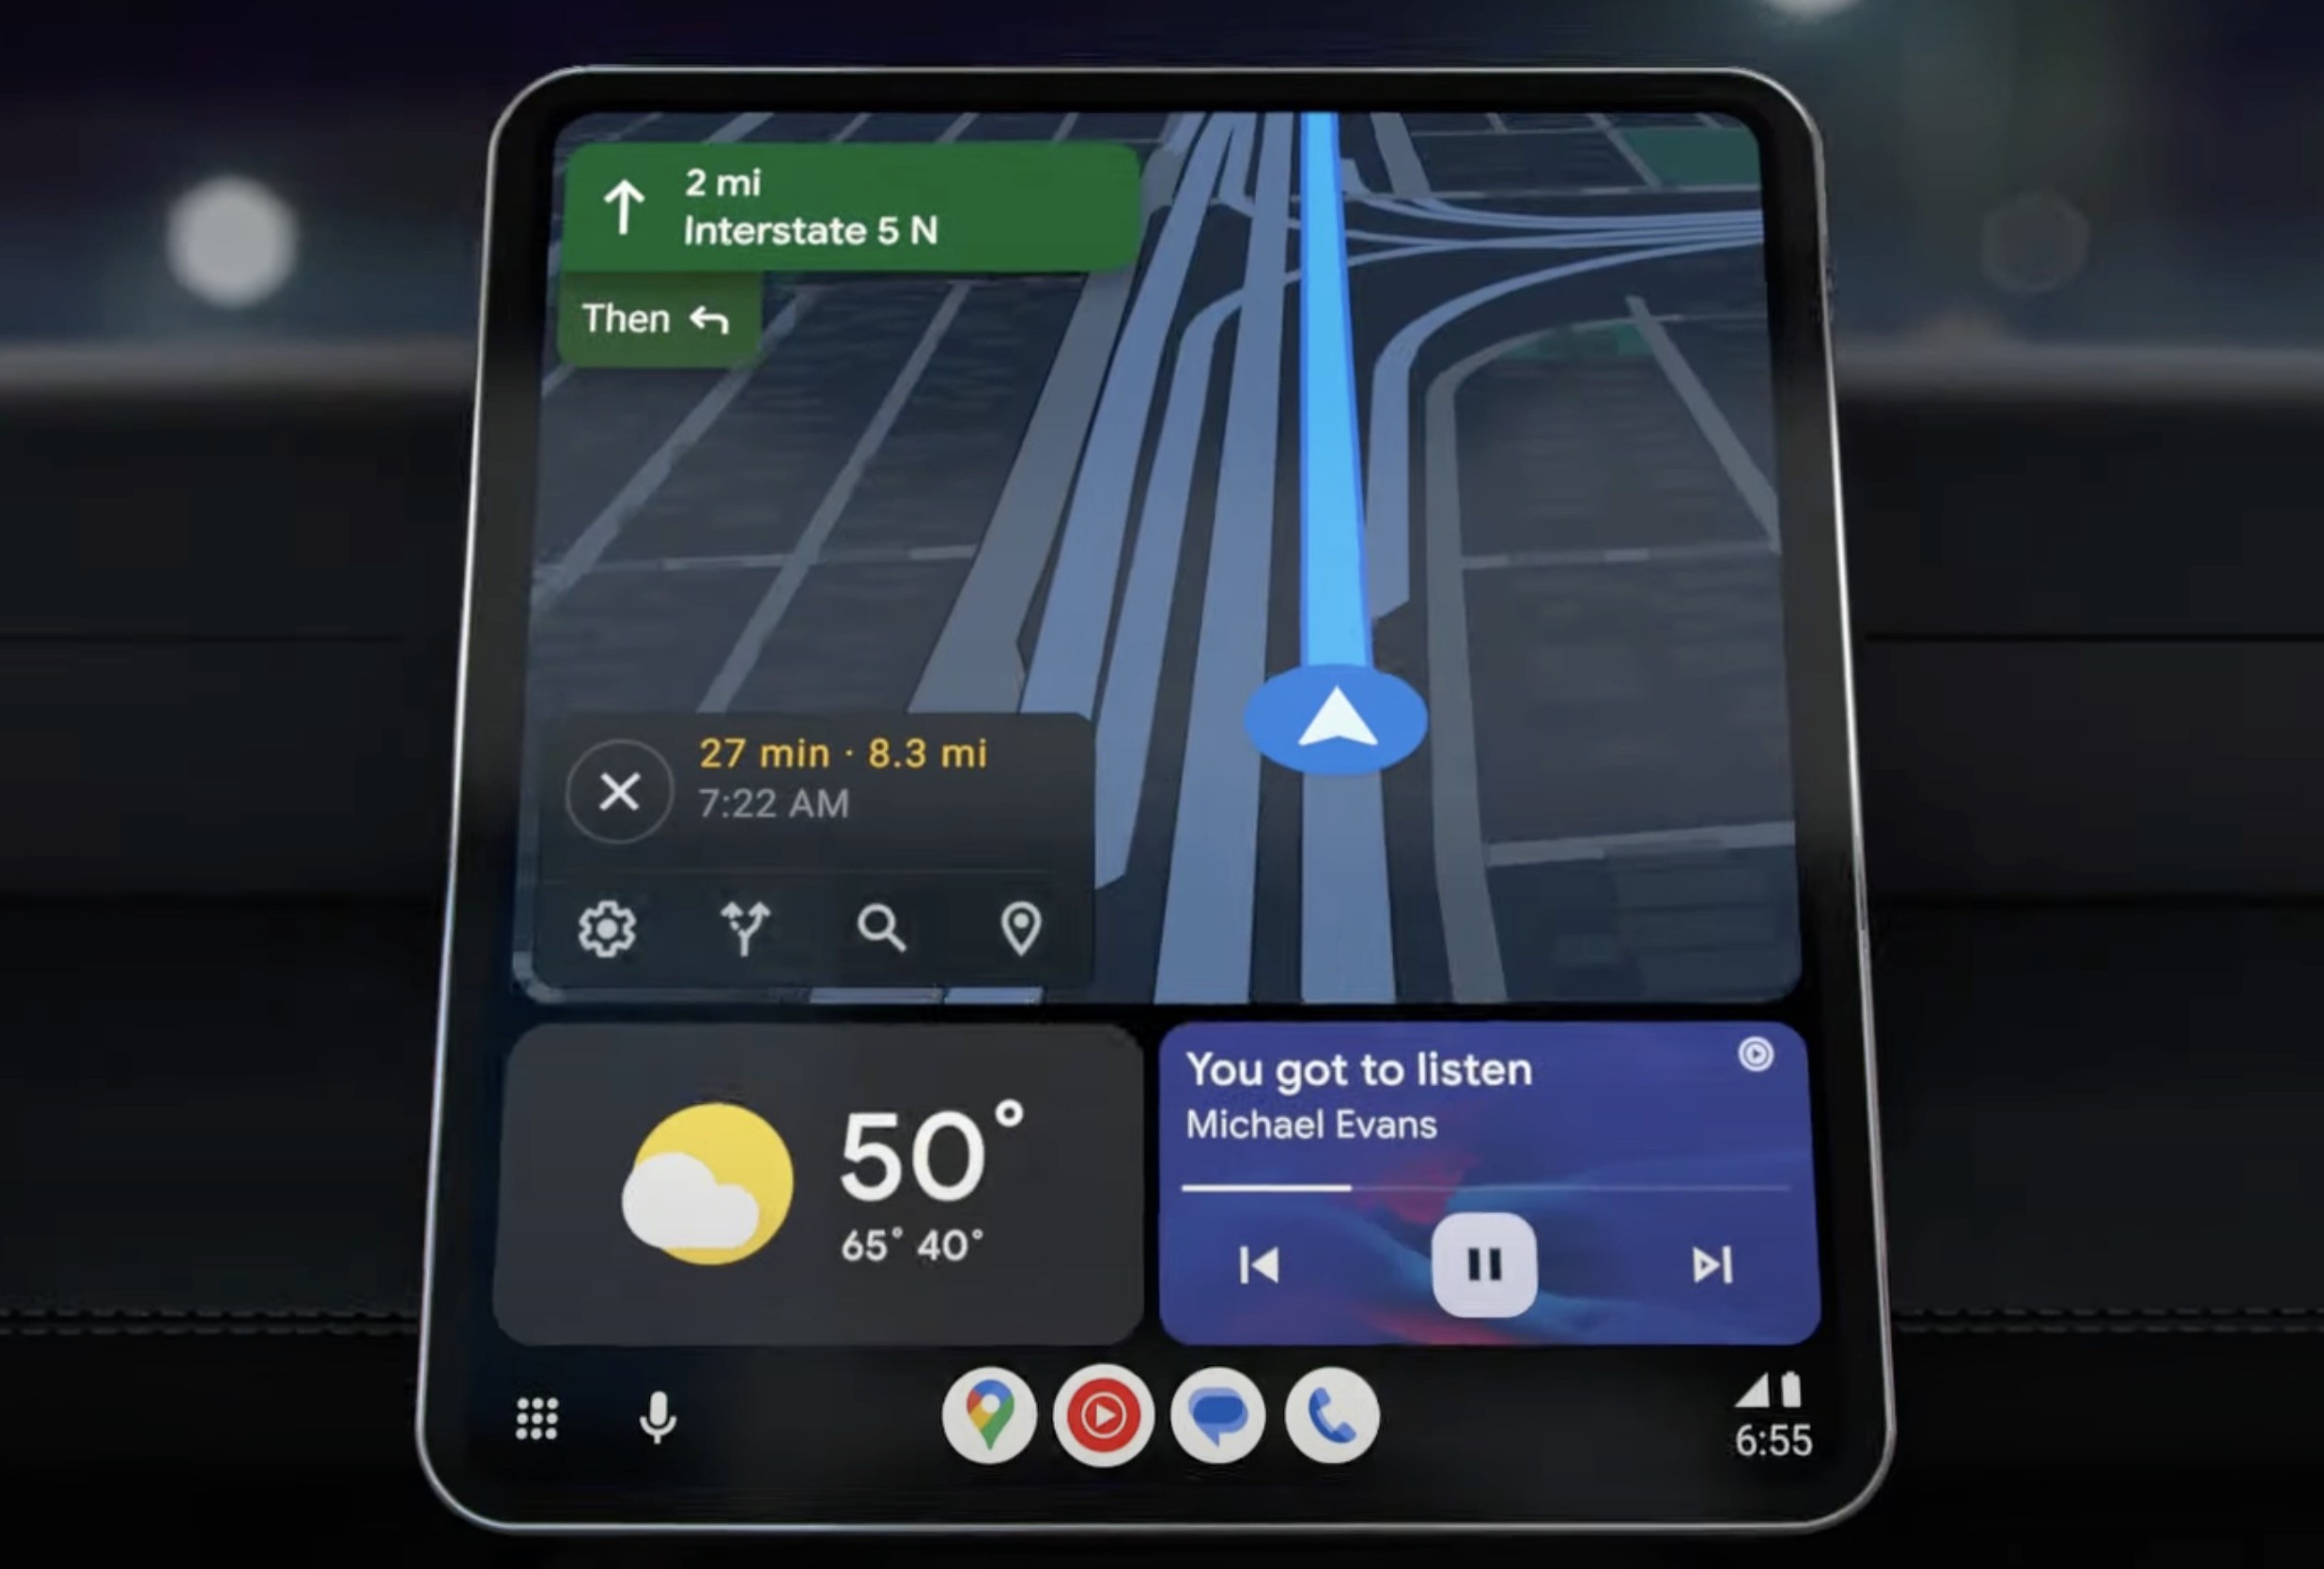 Android Auto Coolwalk Updated With Highly Anticipated Feature ...